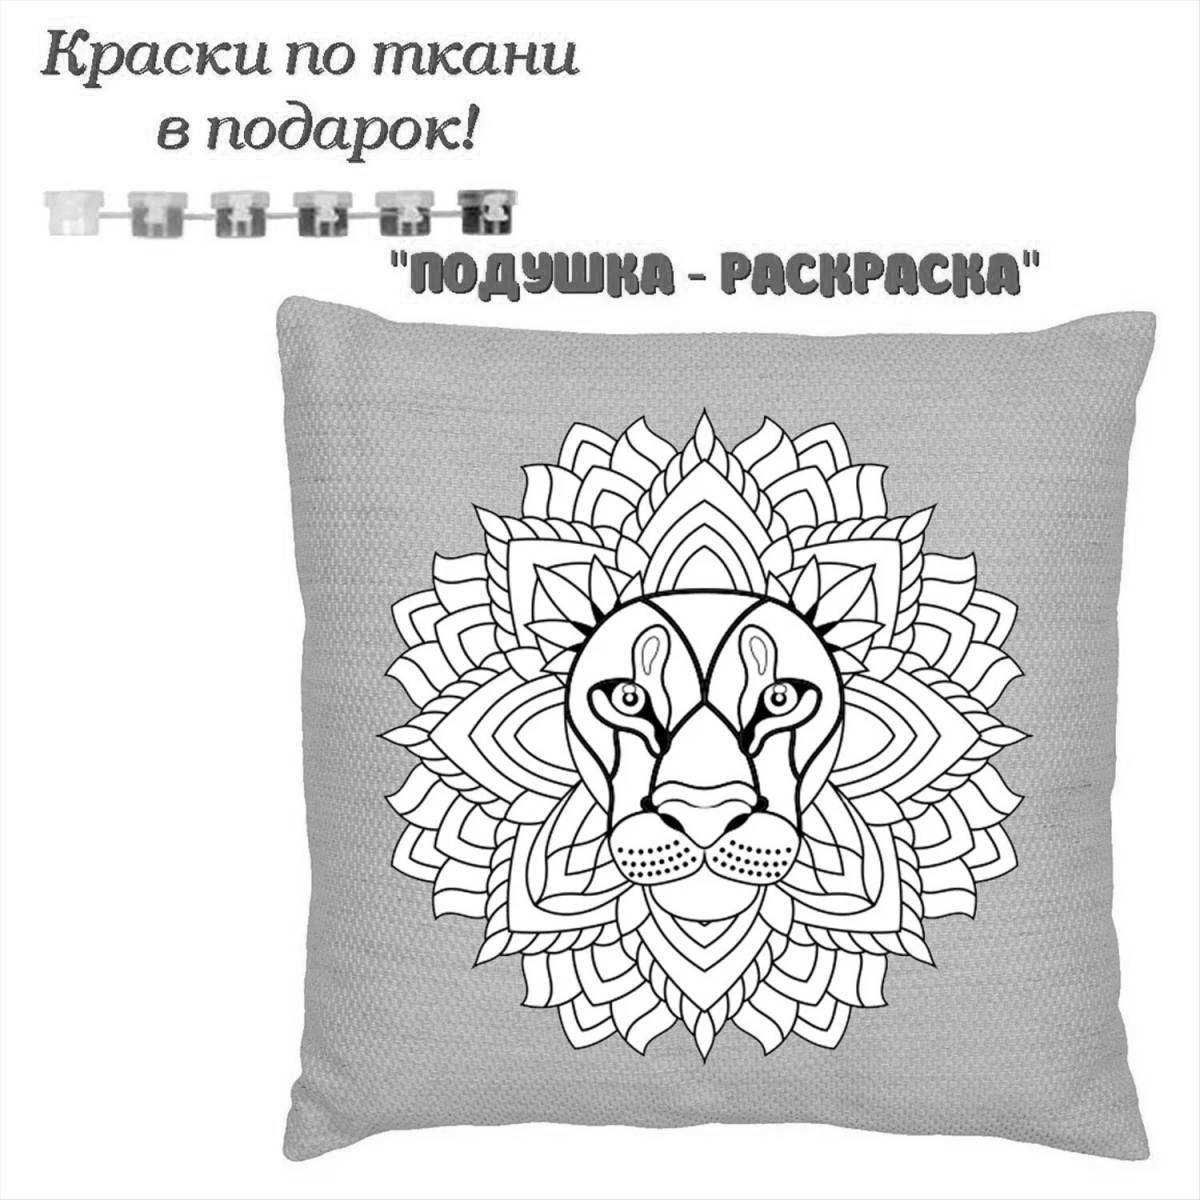 Attractive pillowcase coloring page